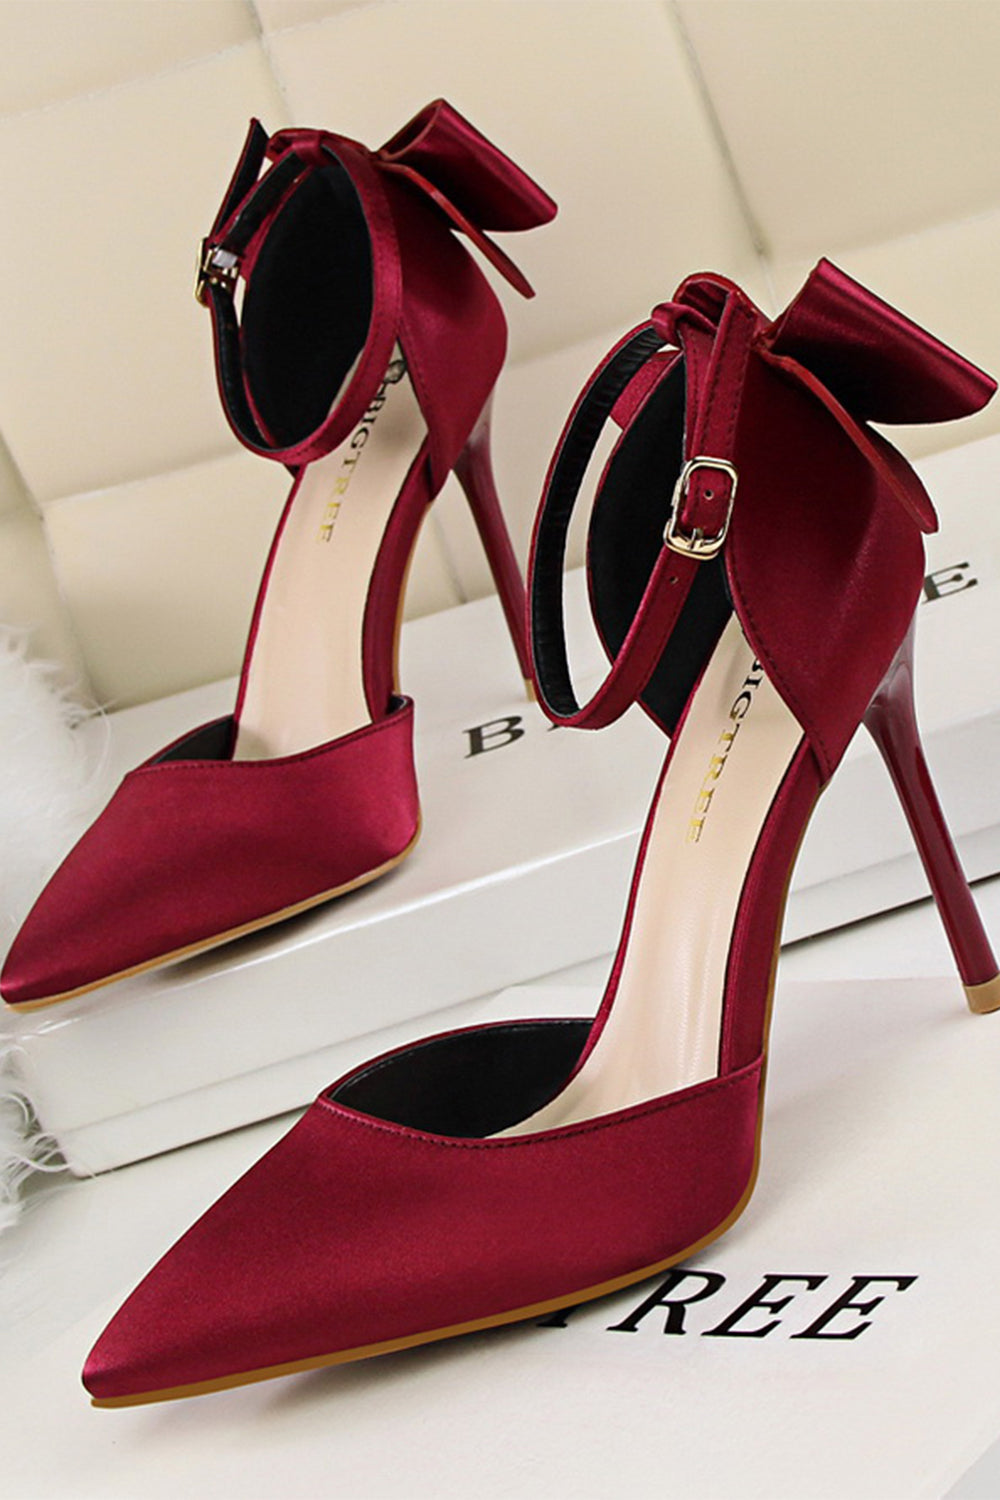 Burgundy Satin Stiletto Heel Closed Toe Pumps Wedding Party shoes with Bunkle